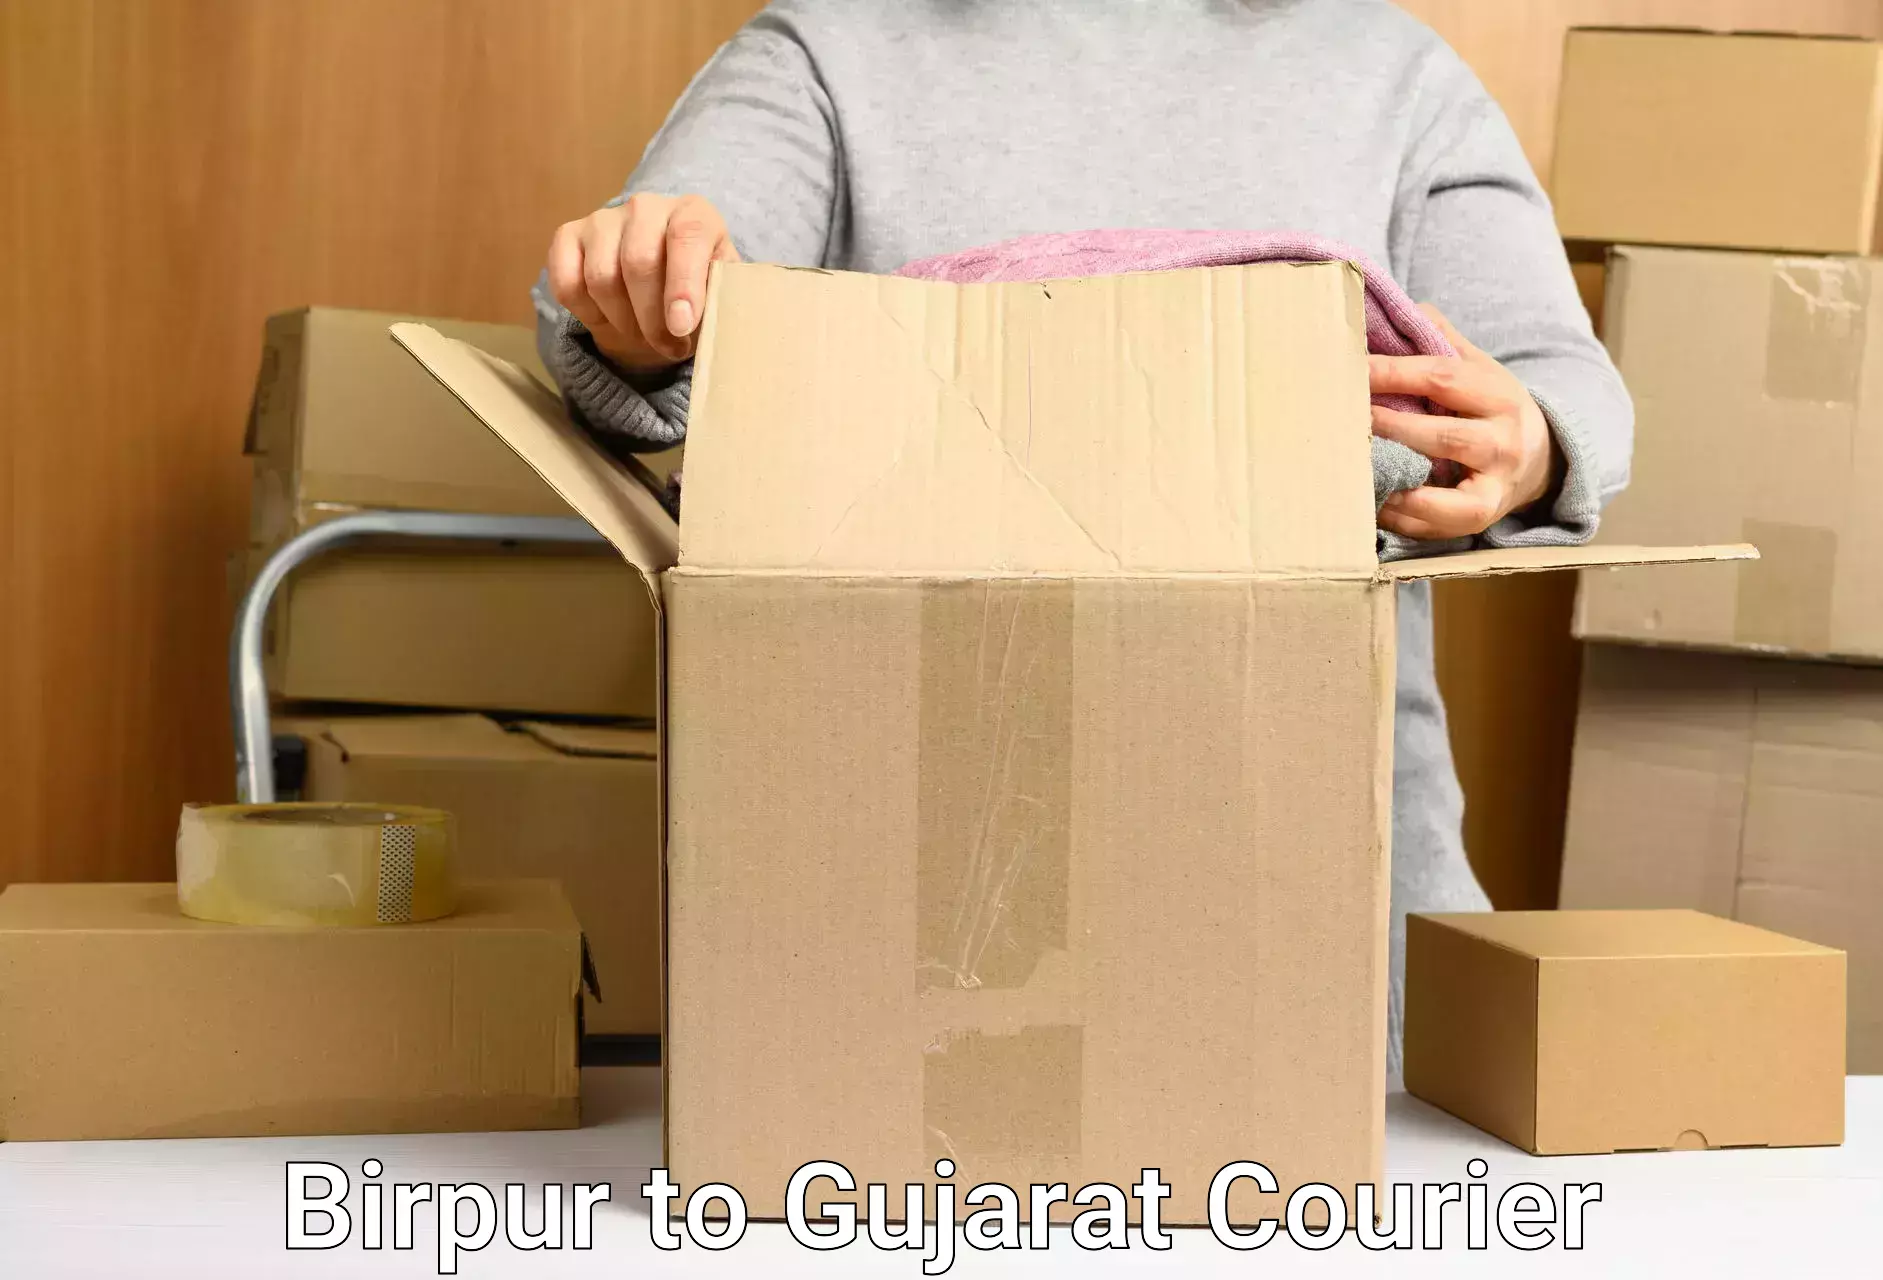 Reliable courier services Birpur to Girgadhada